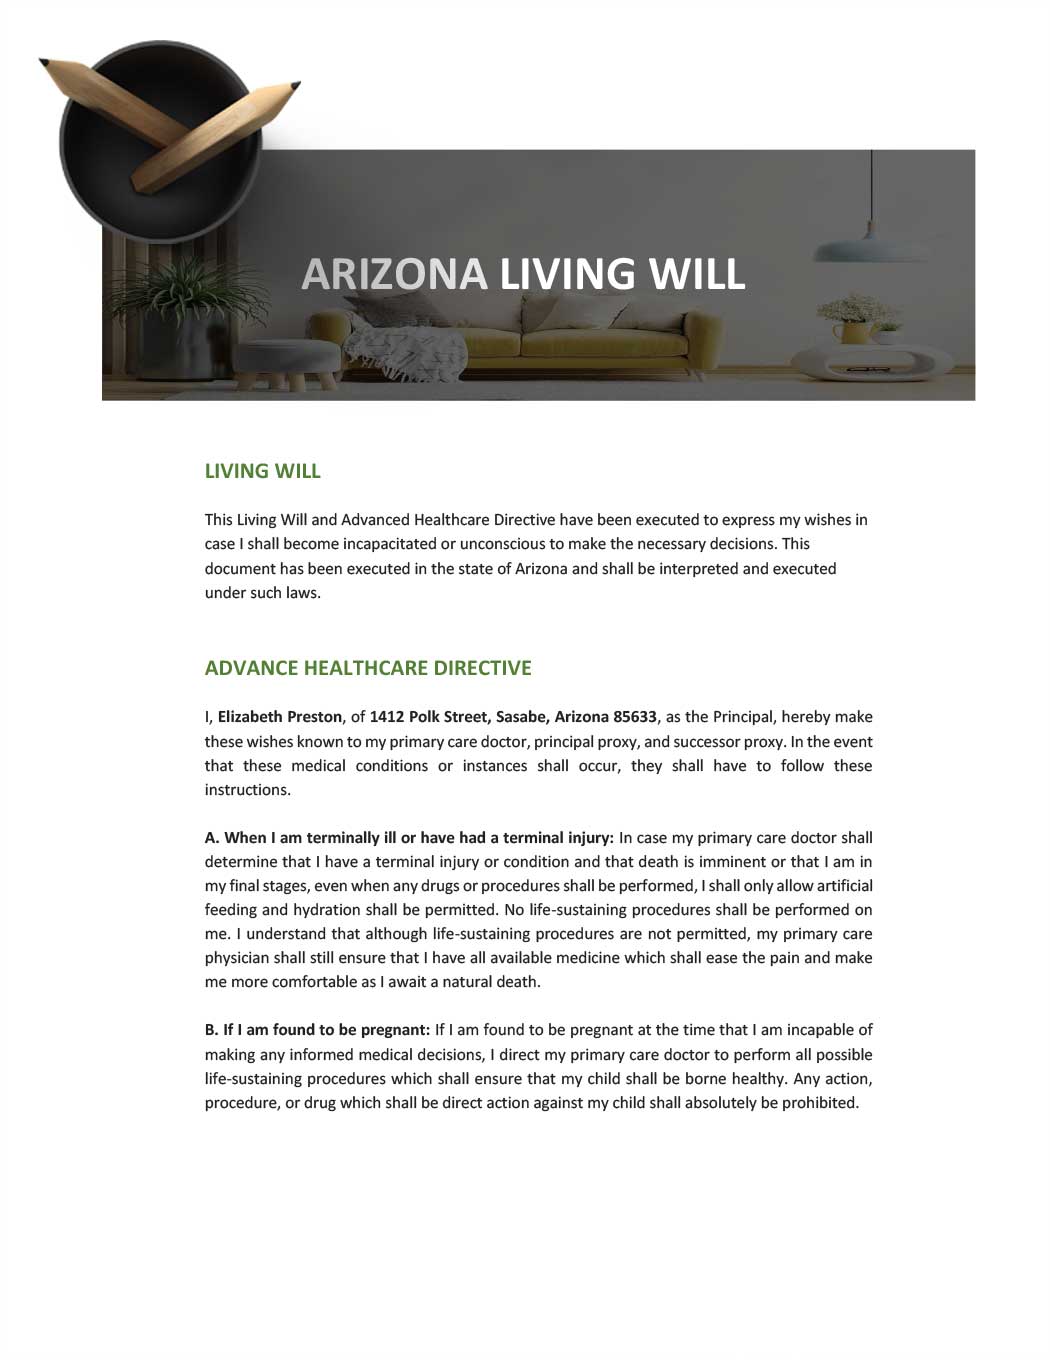 Arizona Living Will Template Download in Word, Google Docs, PSD